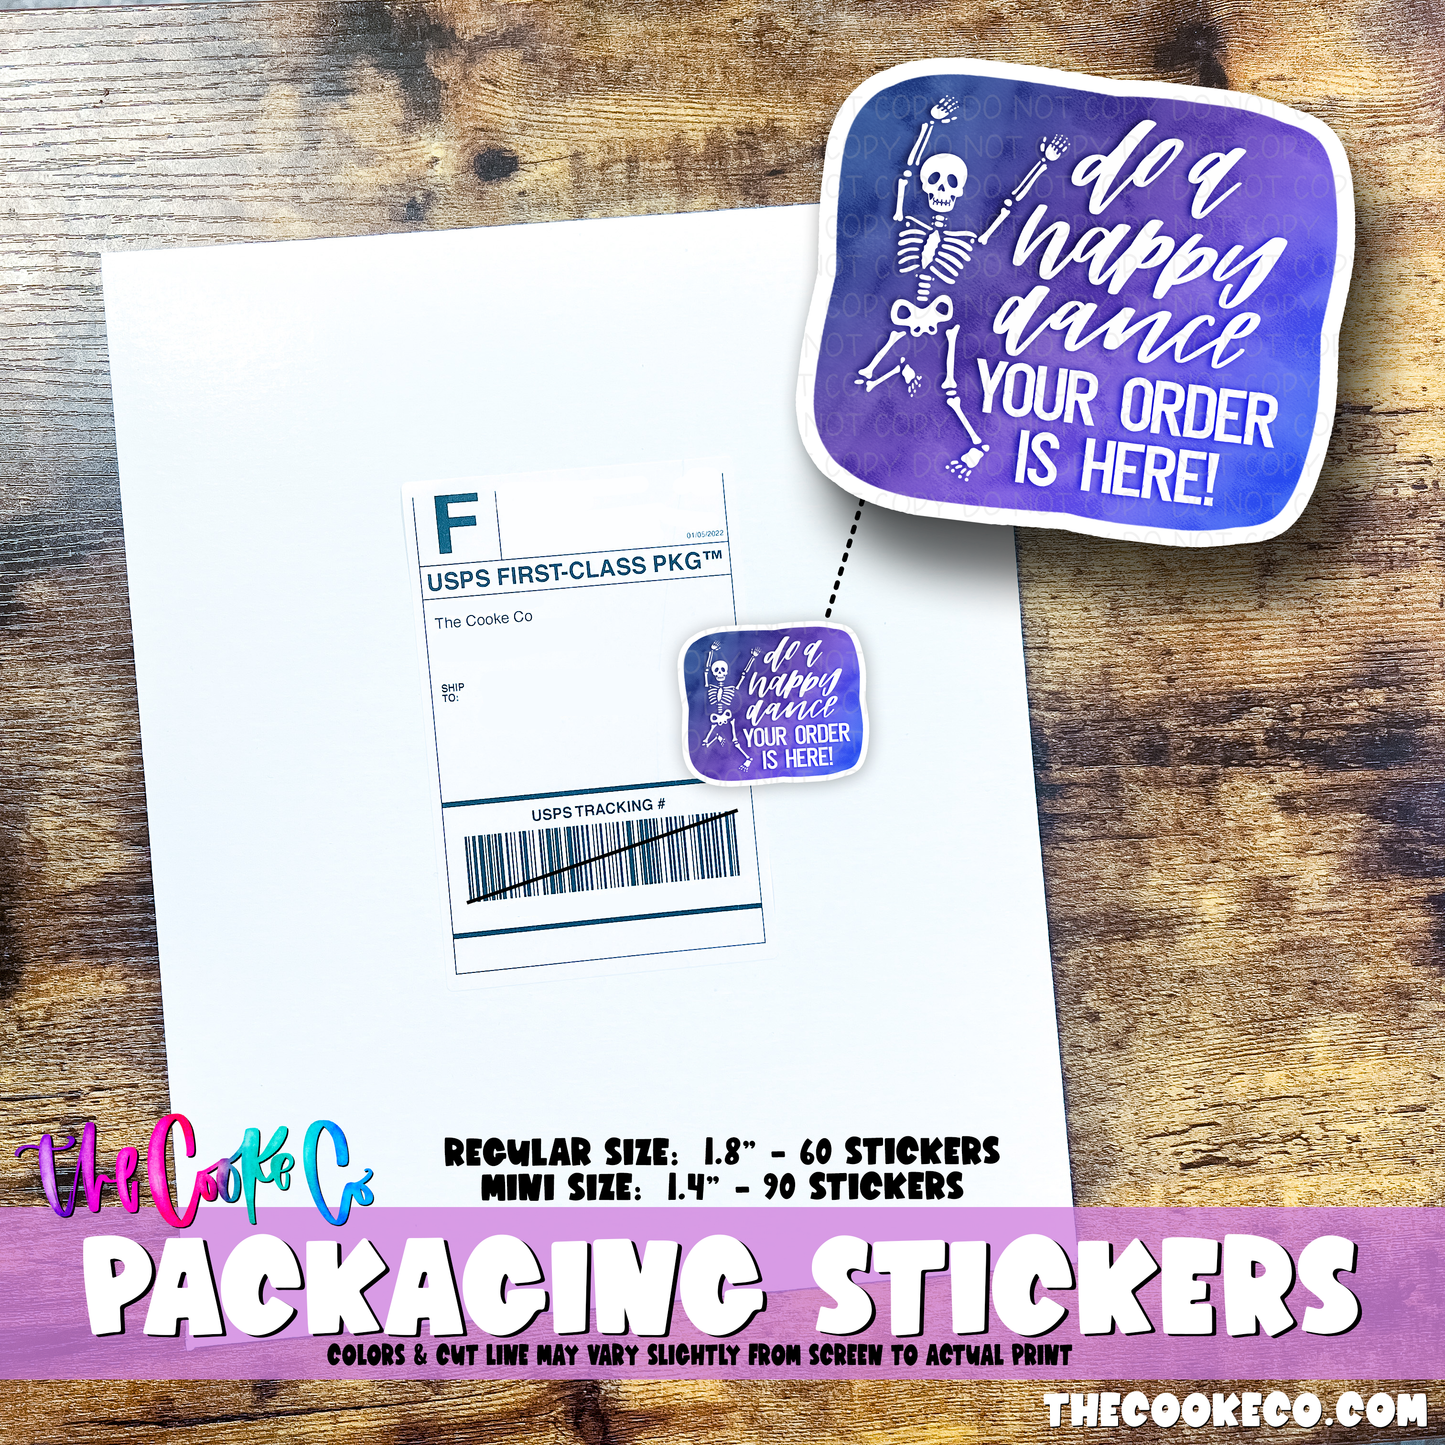 PTO Packaging Stickers | #C0812 - DO A HAPPY DANCE YOUR ORDER IS HERE